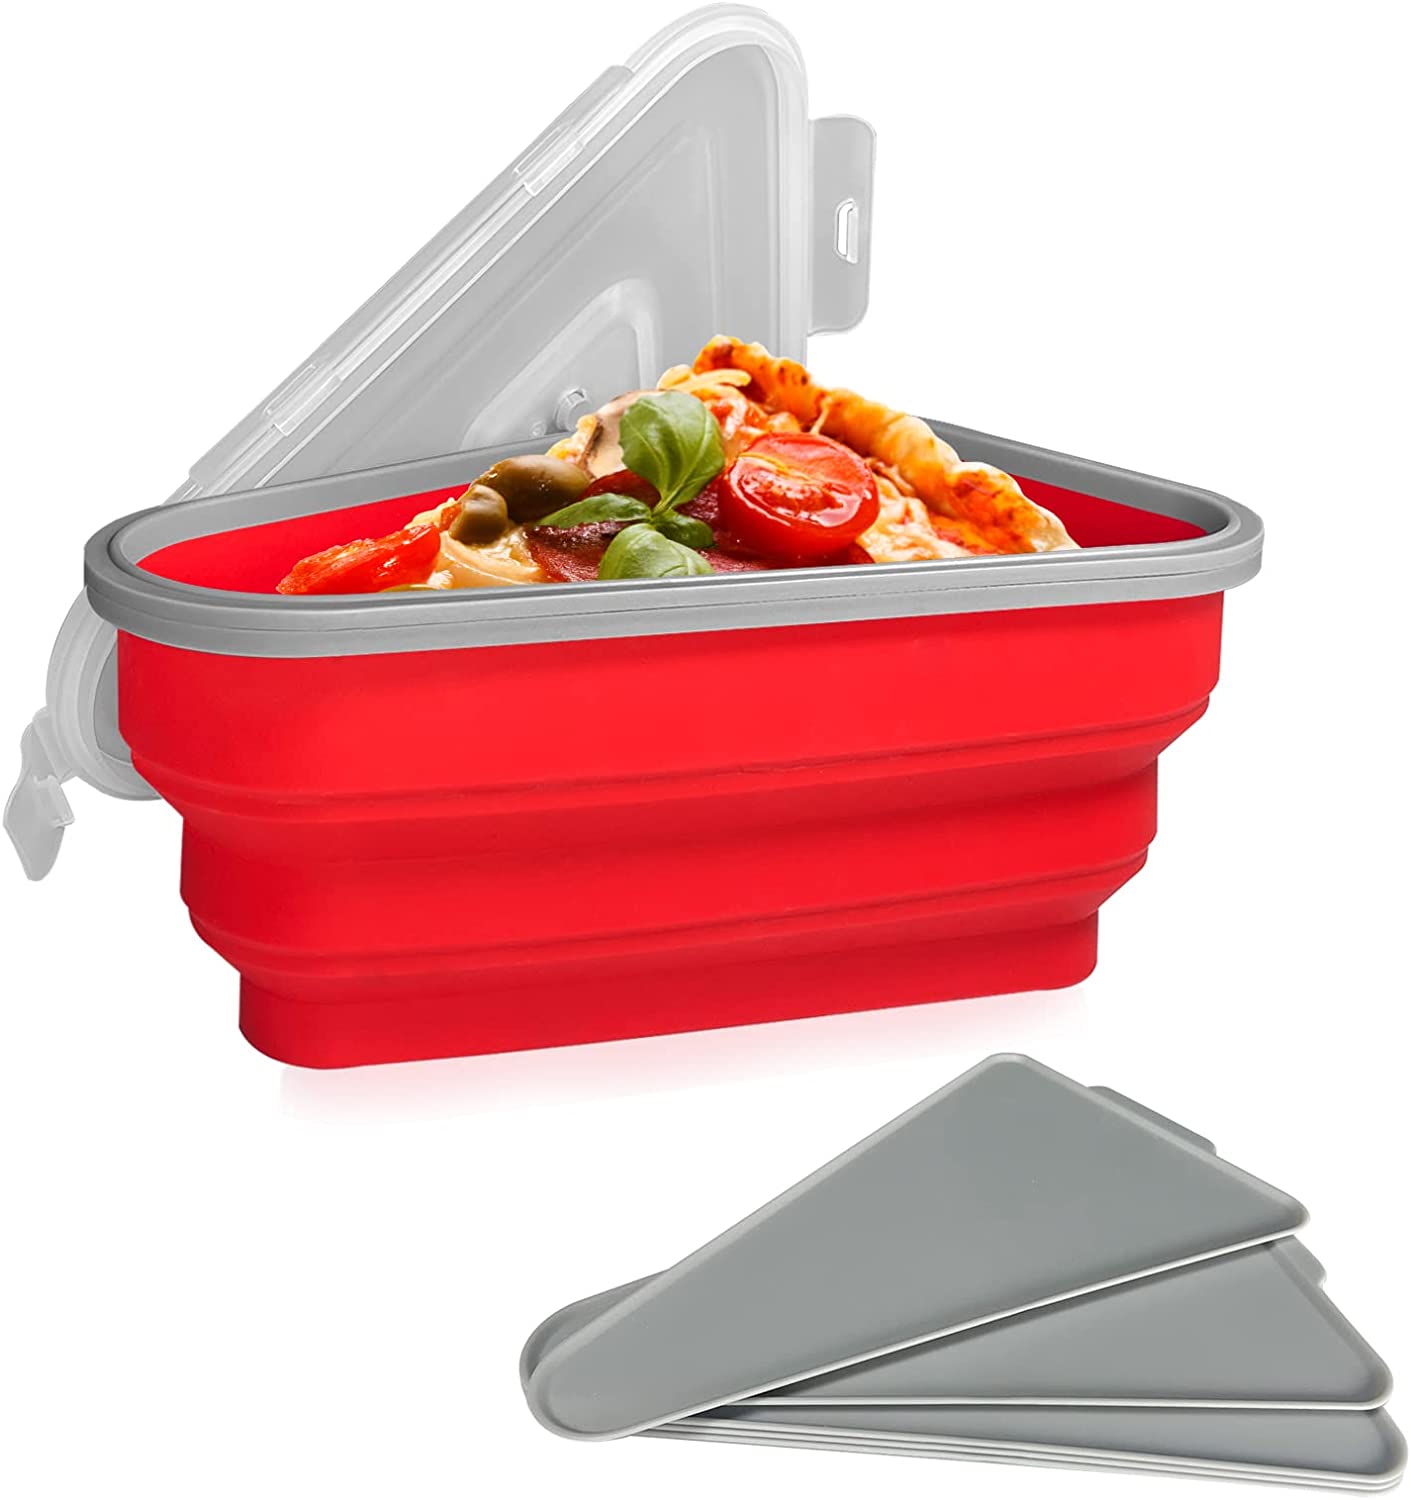 Space-saving pizza container expands to pack in more slices